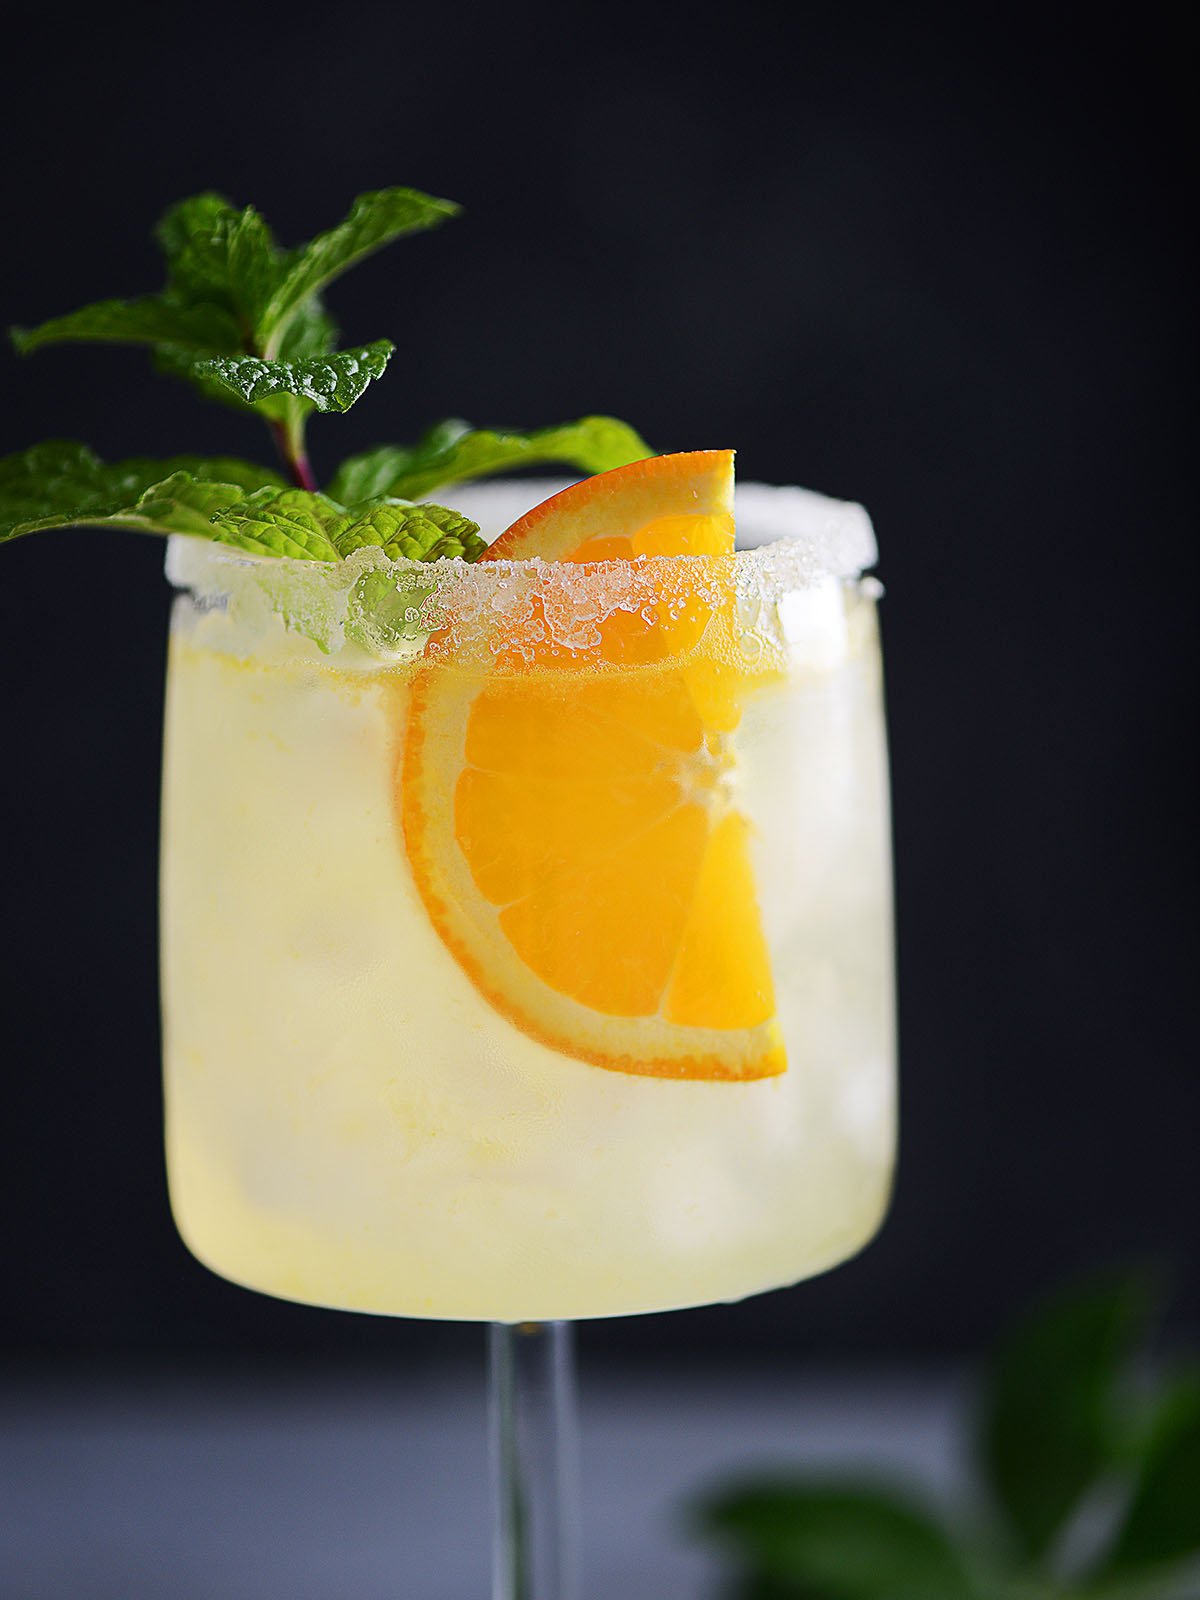 A cocktail glass with a clear drink garnished with an orange slice and a mint sprig.